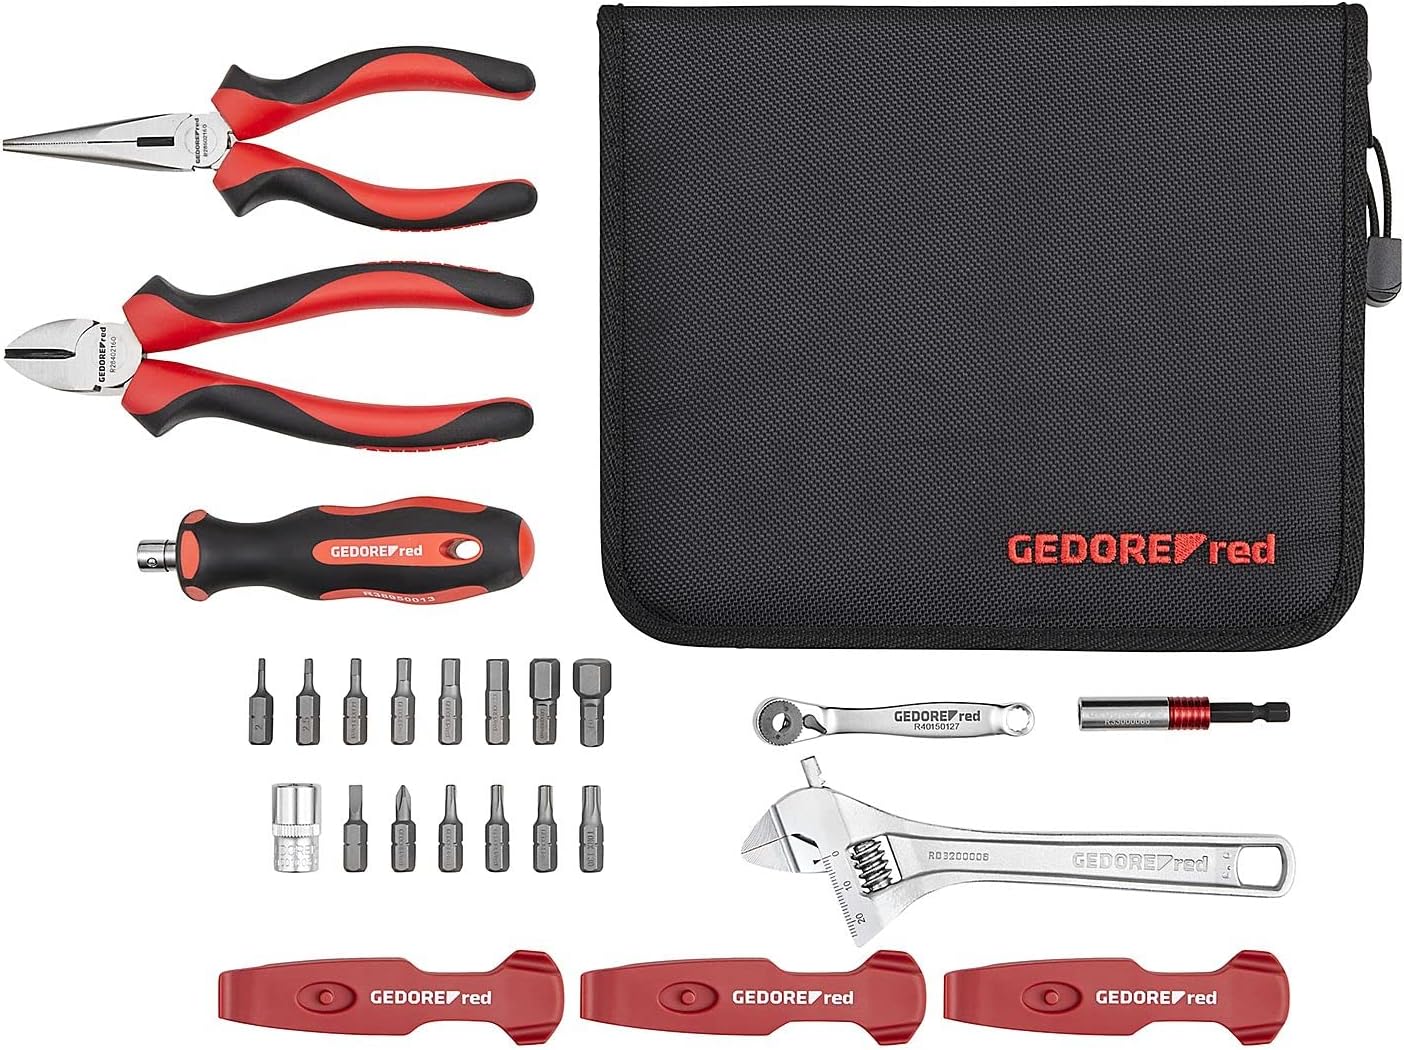 GEDOREred R21702025 Kit d'outils pour vélo (3300195)